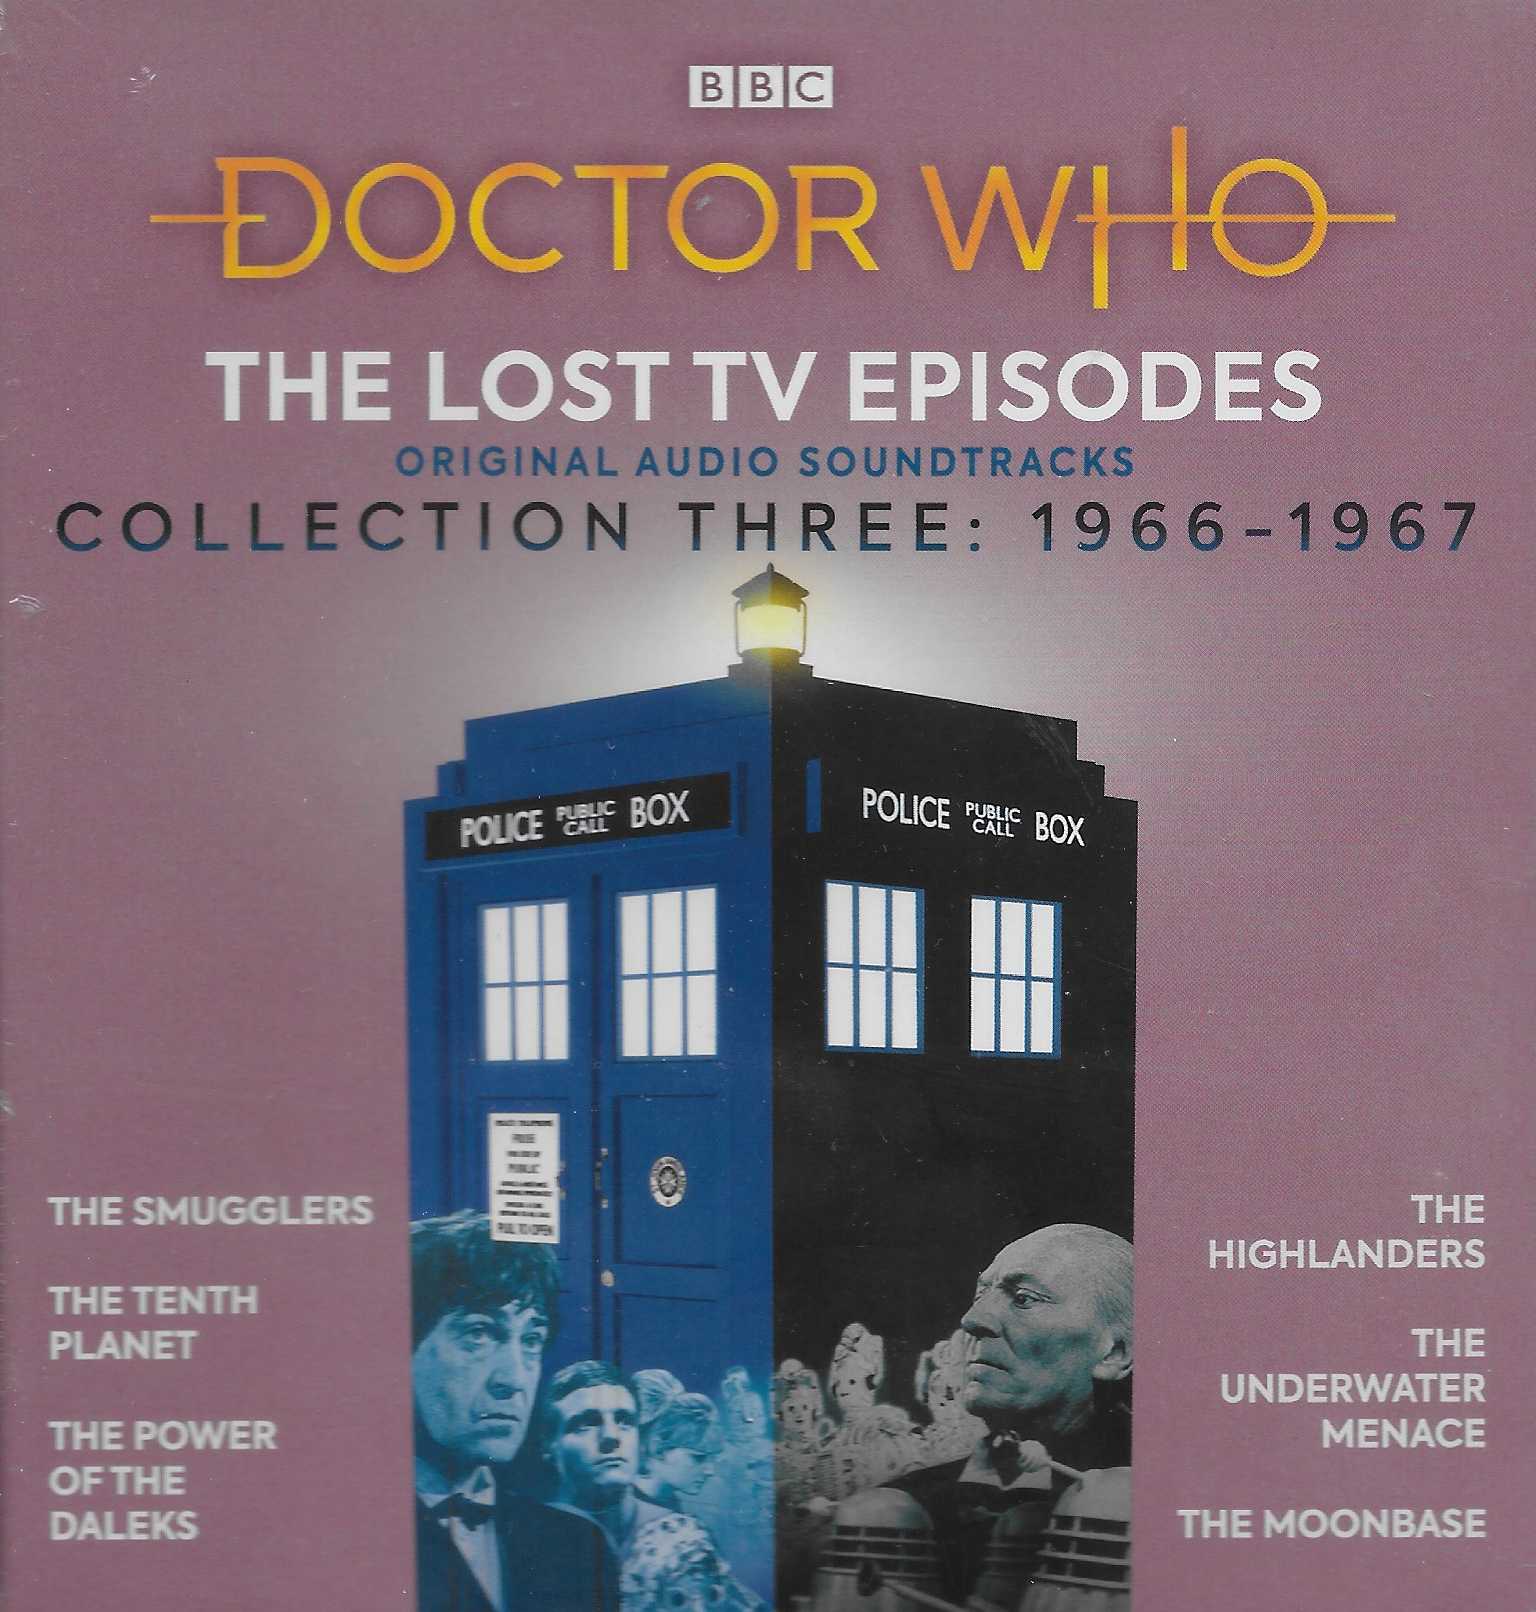 Picture of ISBN 978-1-78753-986-0 Doctor Who - The lost TV episodes - Collection three: 1966-1967 by artist Various from the BBC records and Tapes library